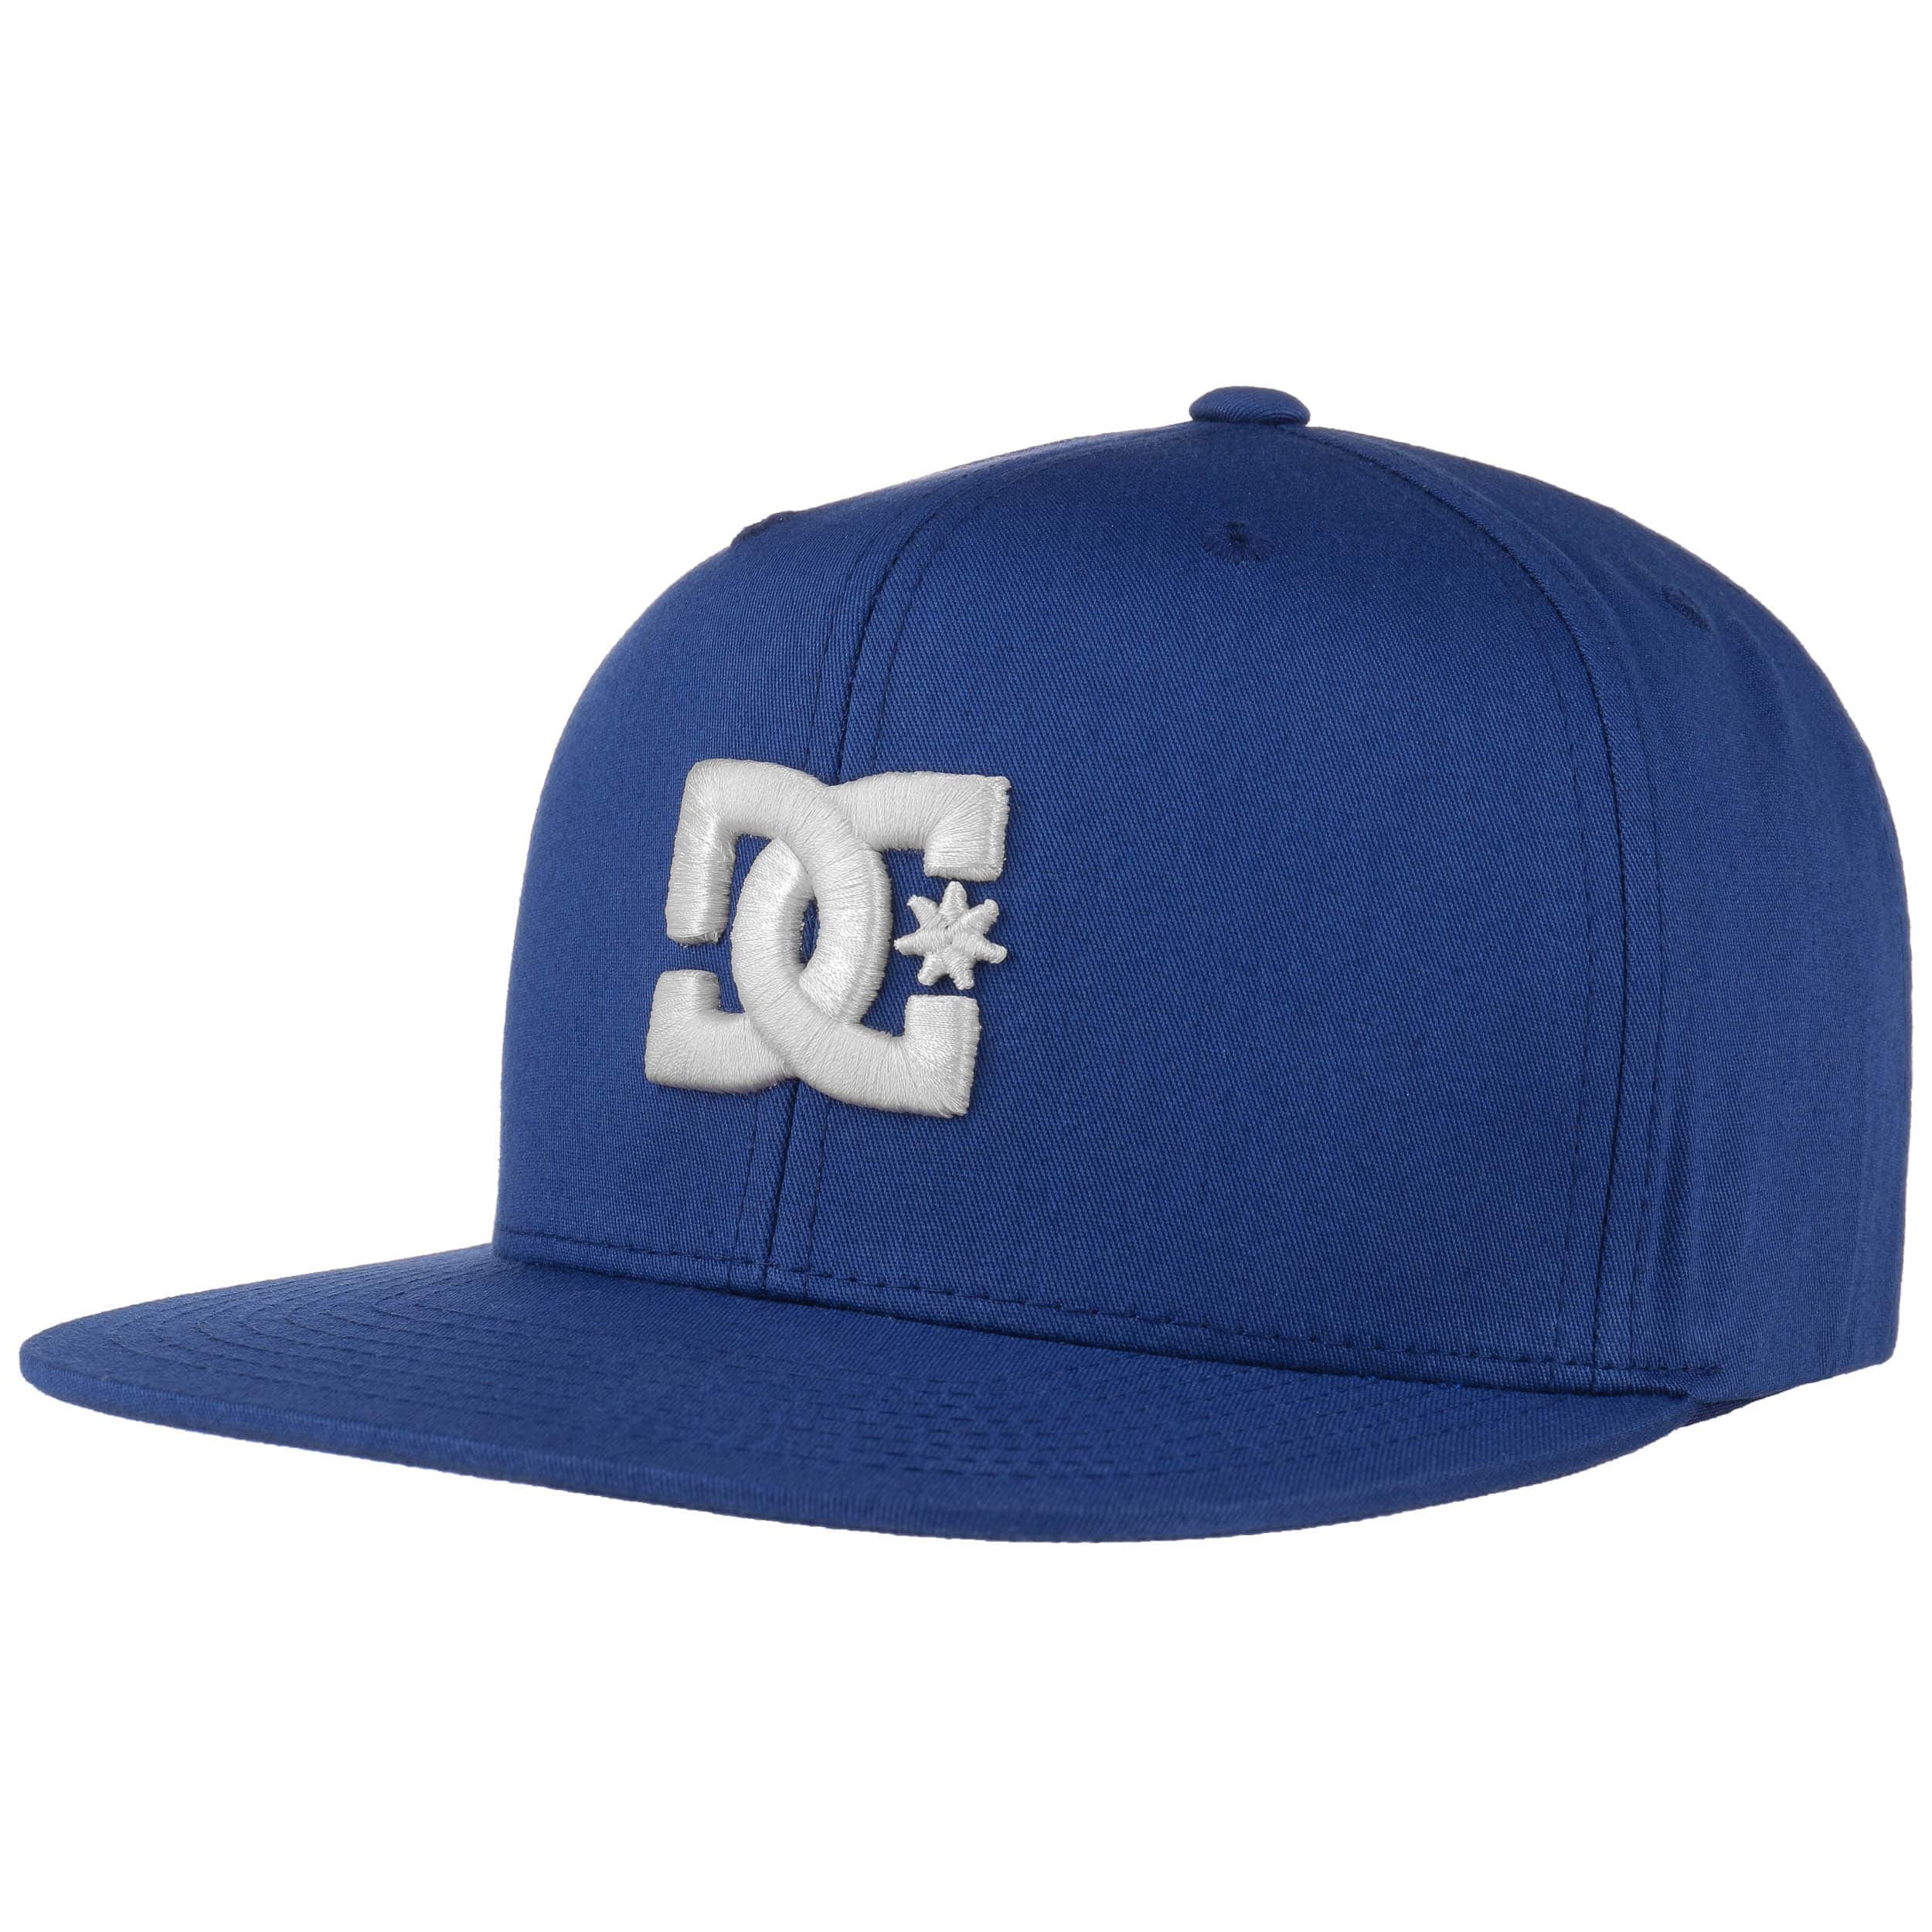 Snappy Snapback Cap by DC Shoes Co - 26,95